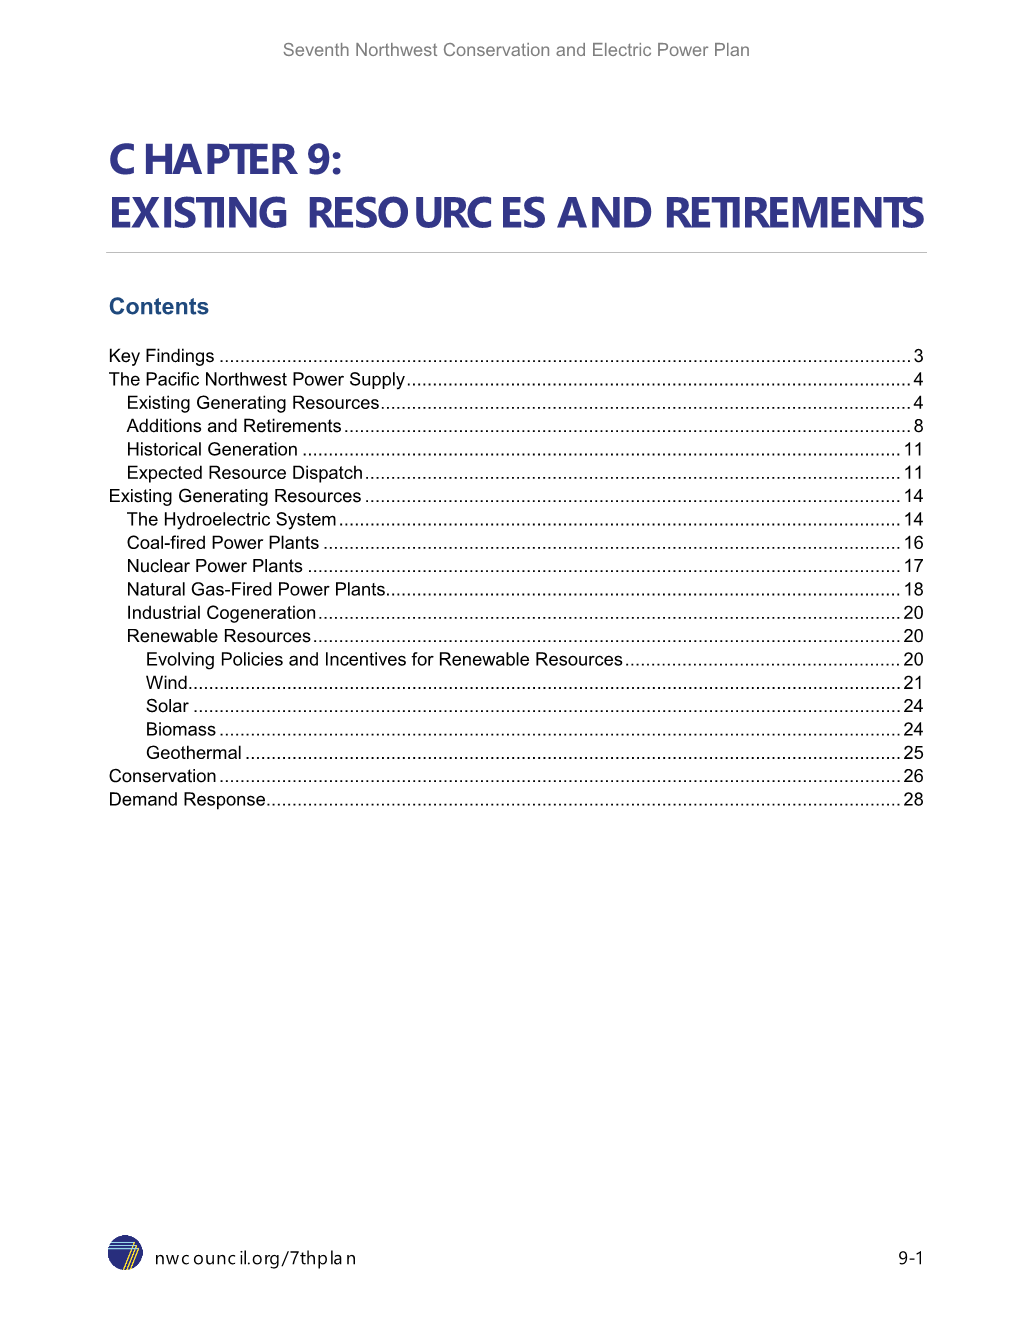 Chapter 9: Existing Resources and Retirements